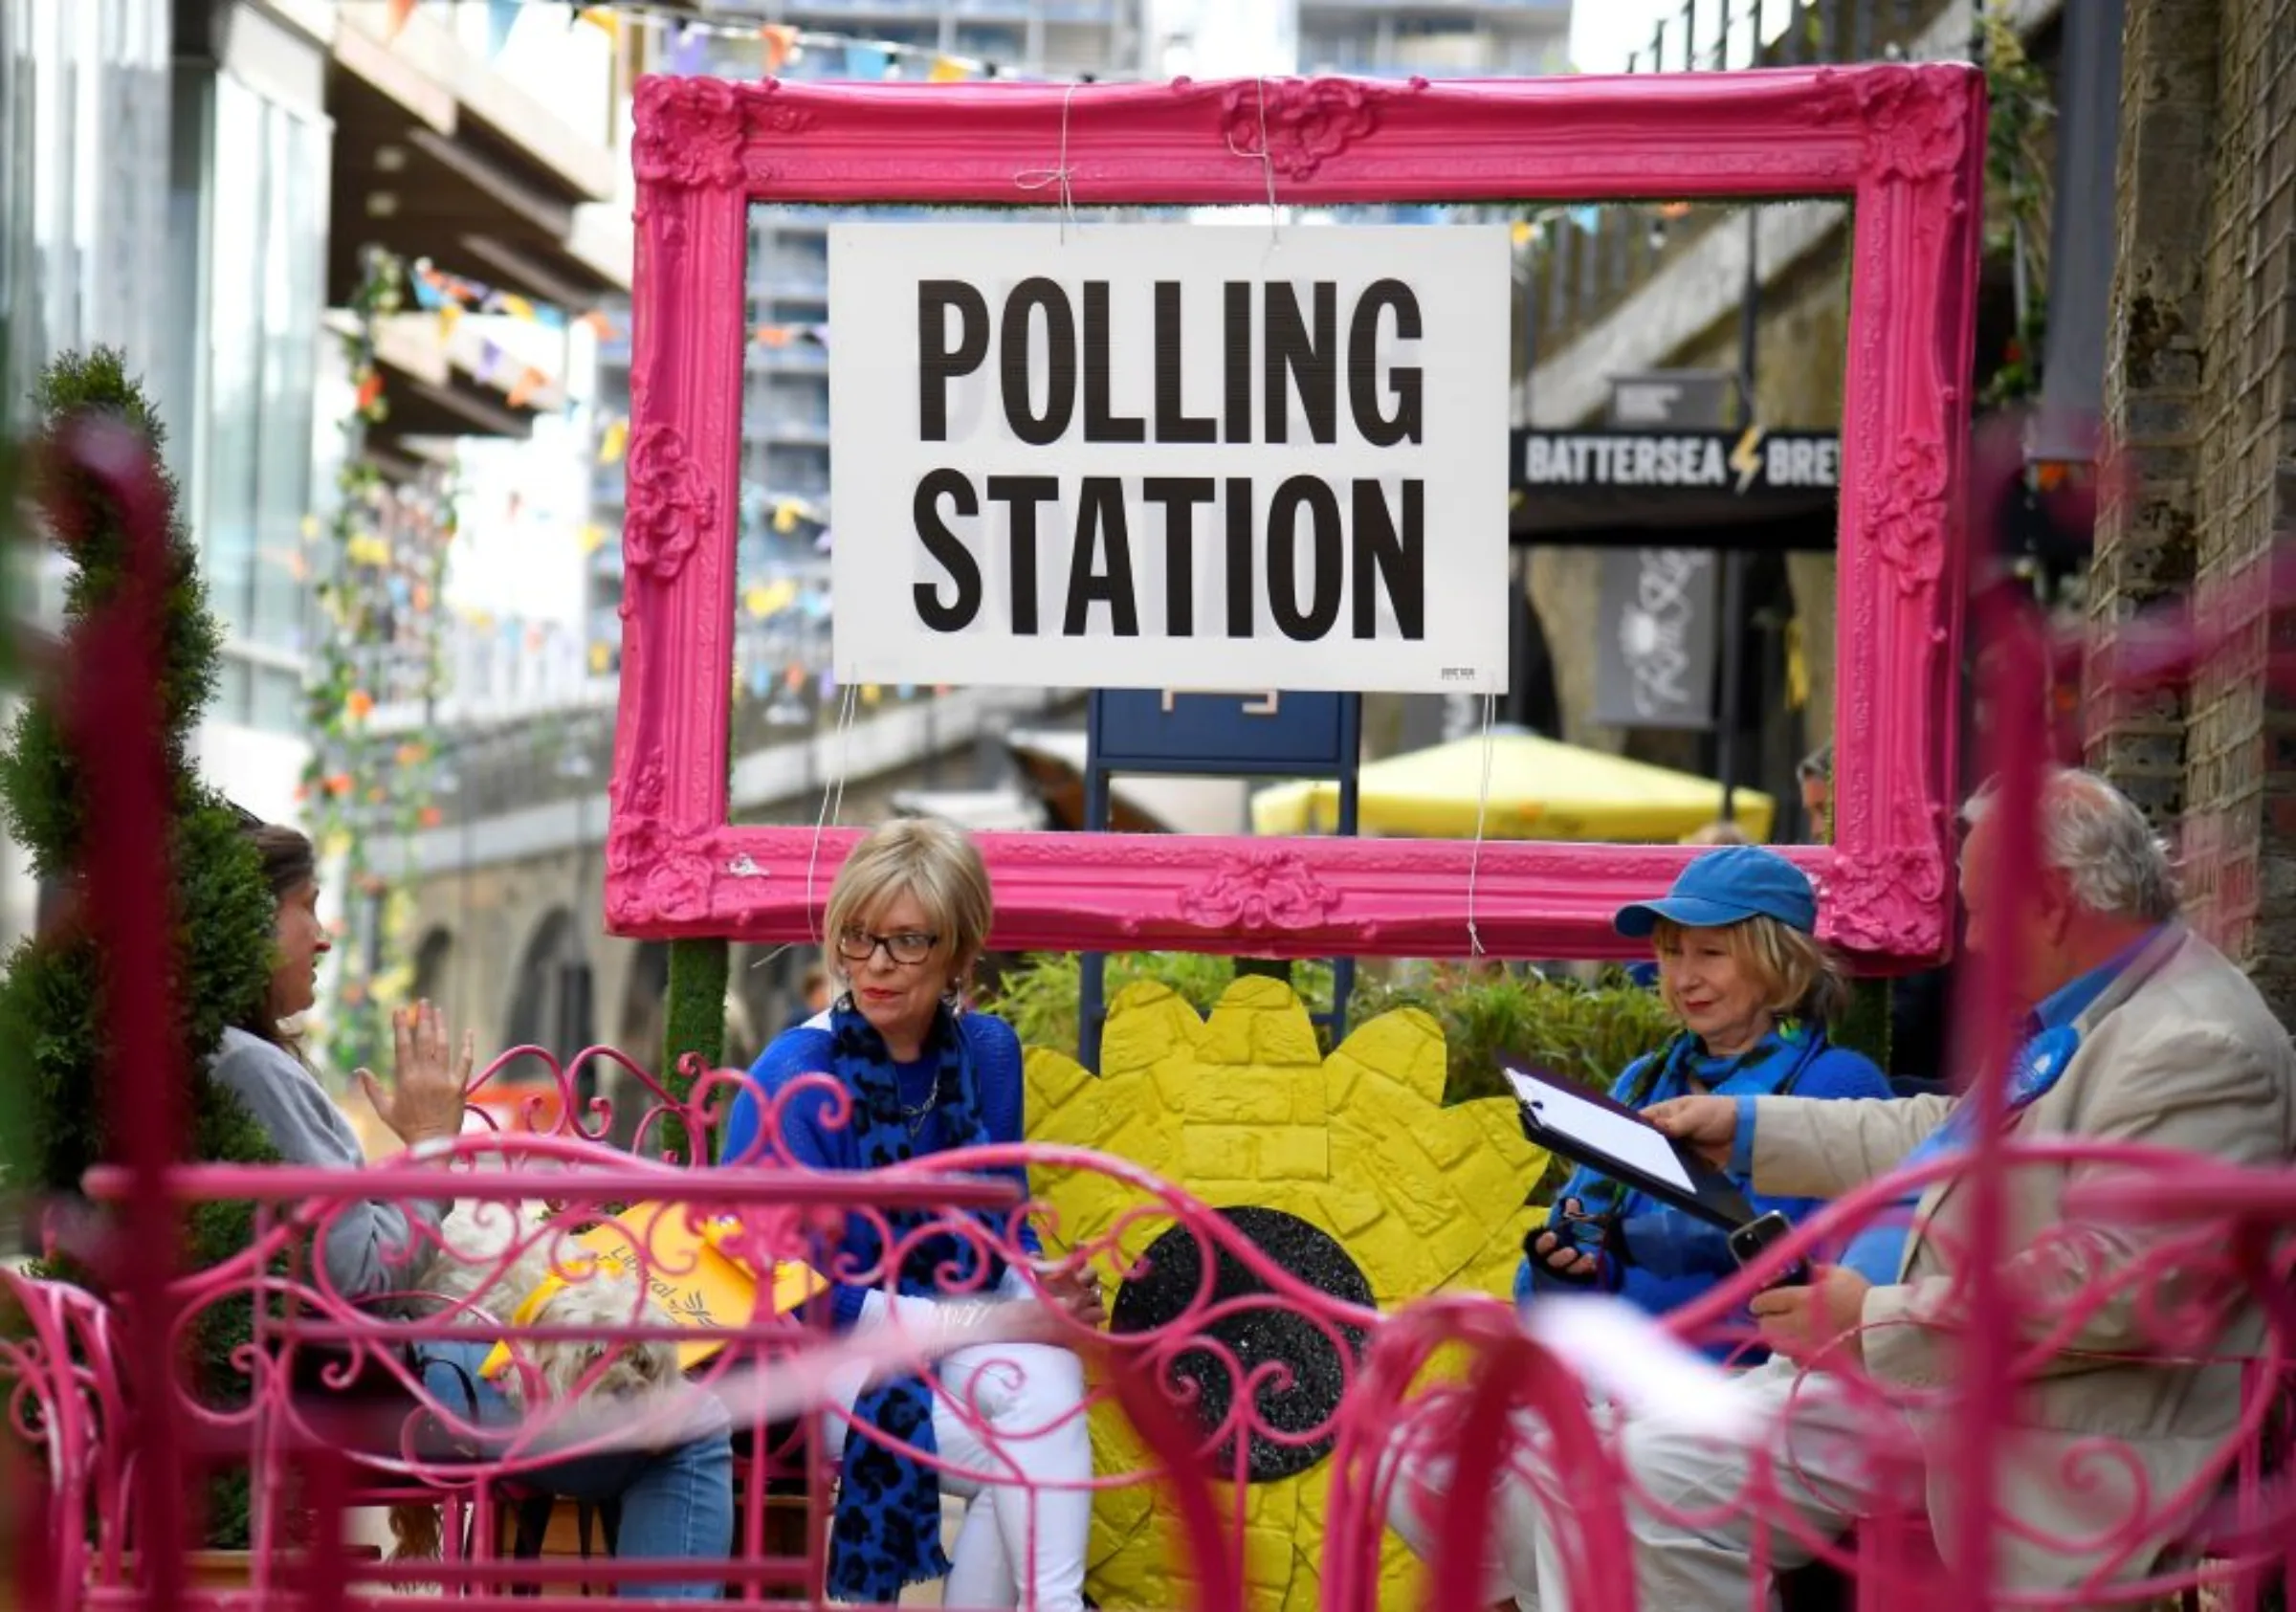 Volunteers wait to record voters' intentions at a new polling station at The Turbine Theatre in the Nine Elms ward of the borough of Wandsworth on the day of the local elections, in London, Britain, May 5, 2022